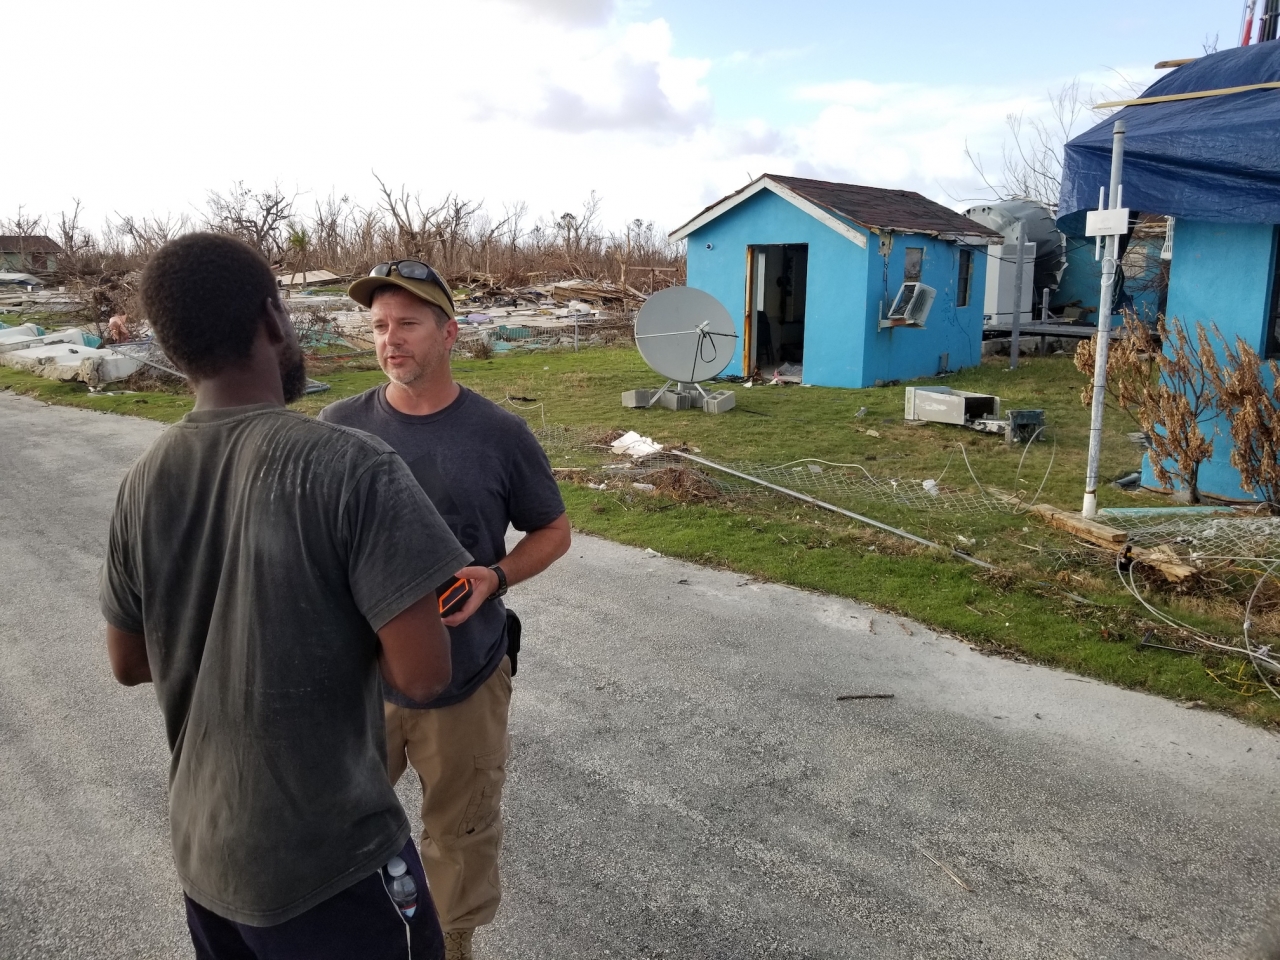 Two men talk outside buildings damaged by hurricanes